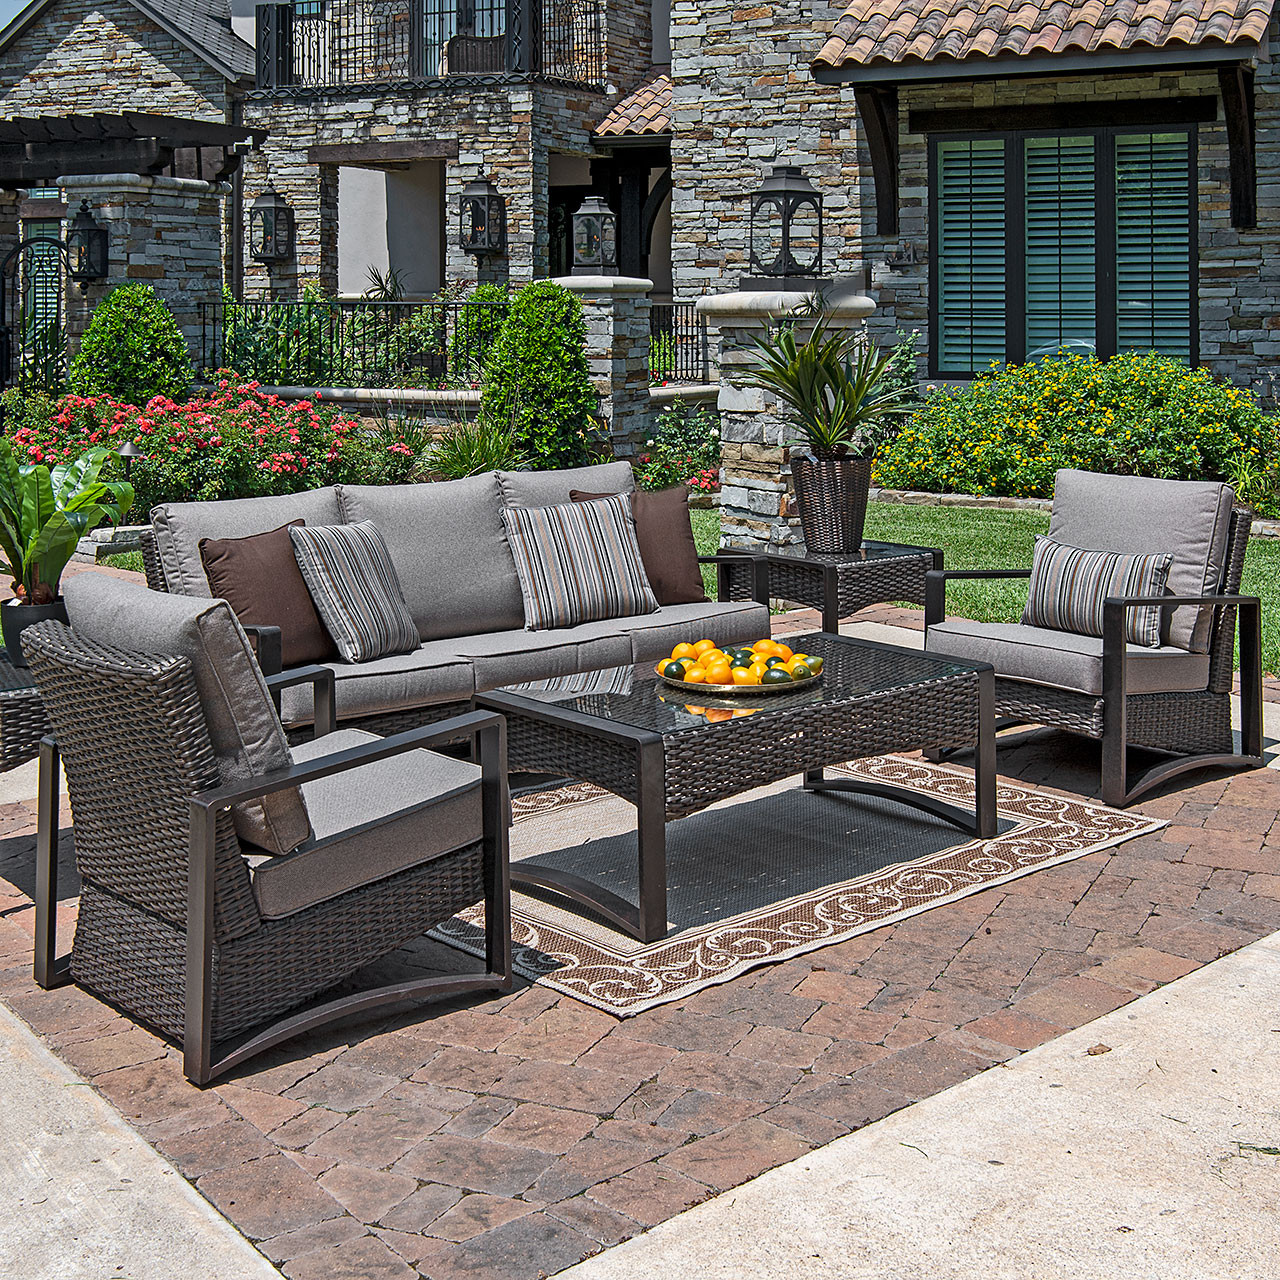 Sienna Aged Bronze Aluminum and Outdoor Wicker with Sea Leaf Cushion 4 Pc. Sofa Group with 52 x 28 in. Coffee Table